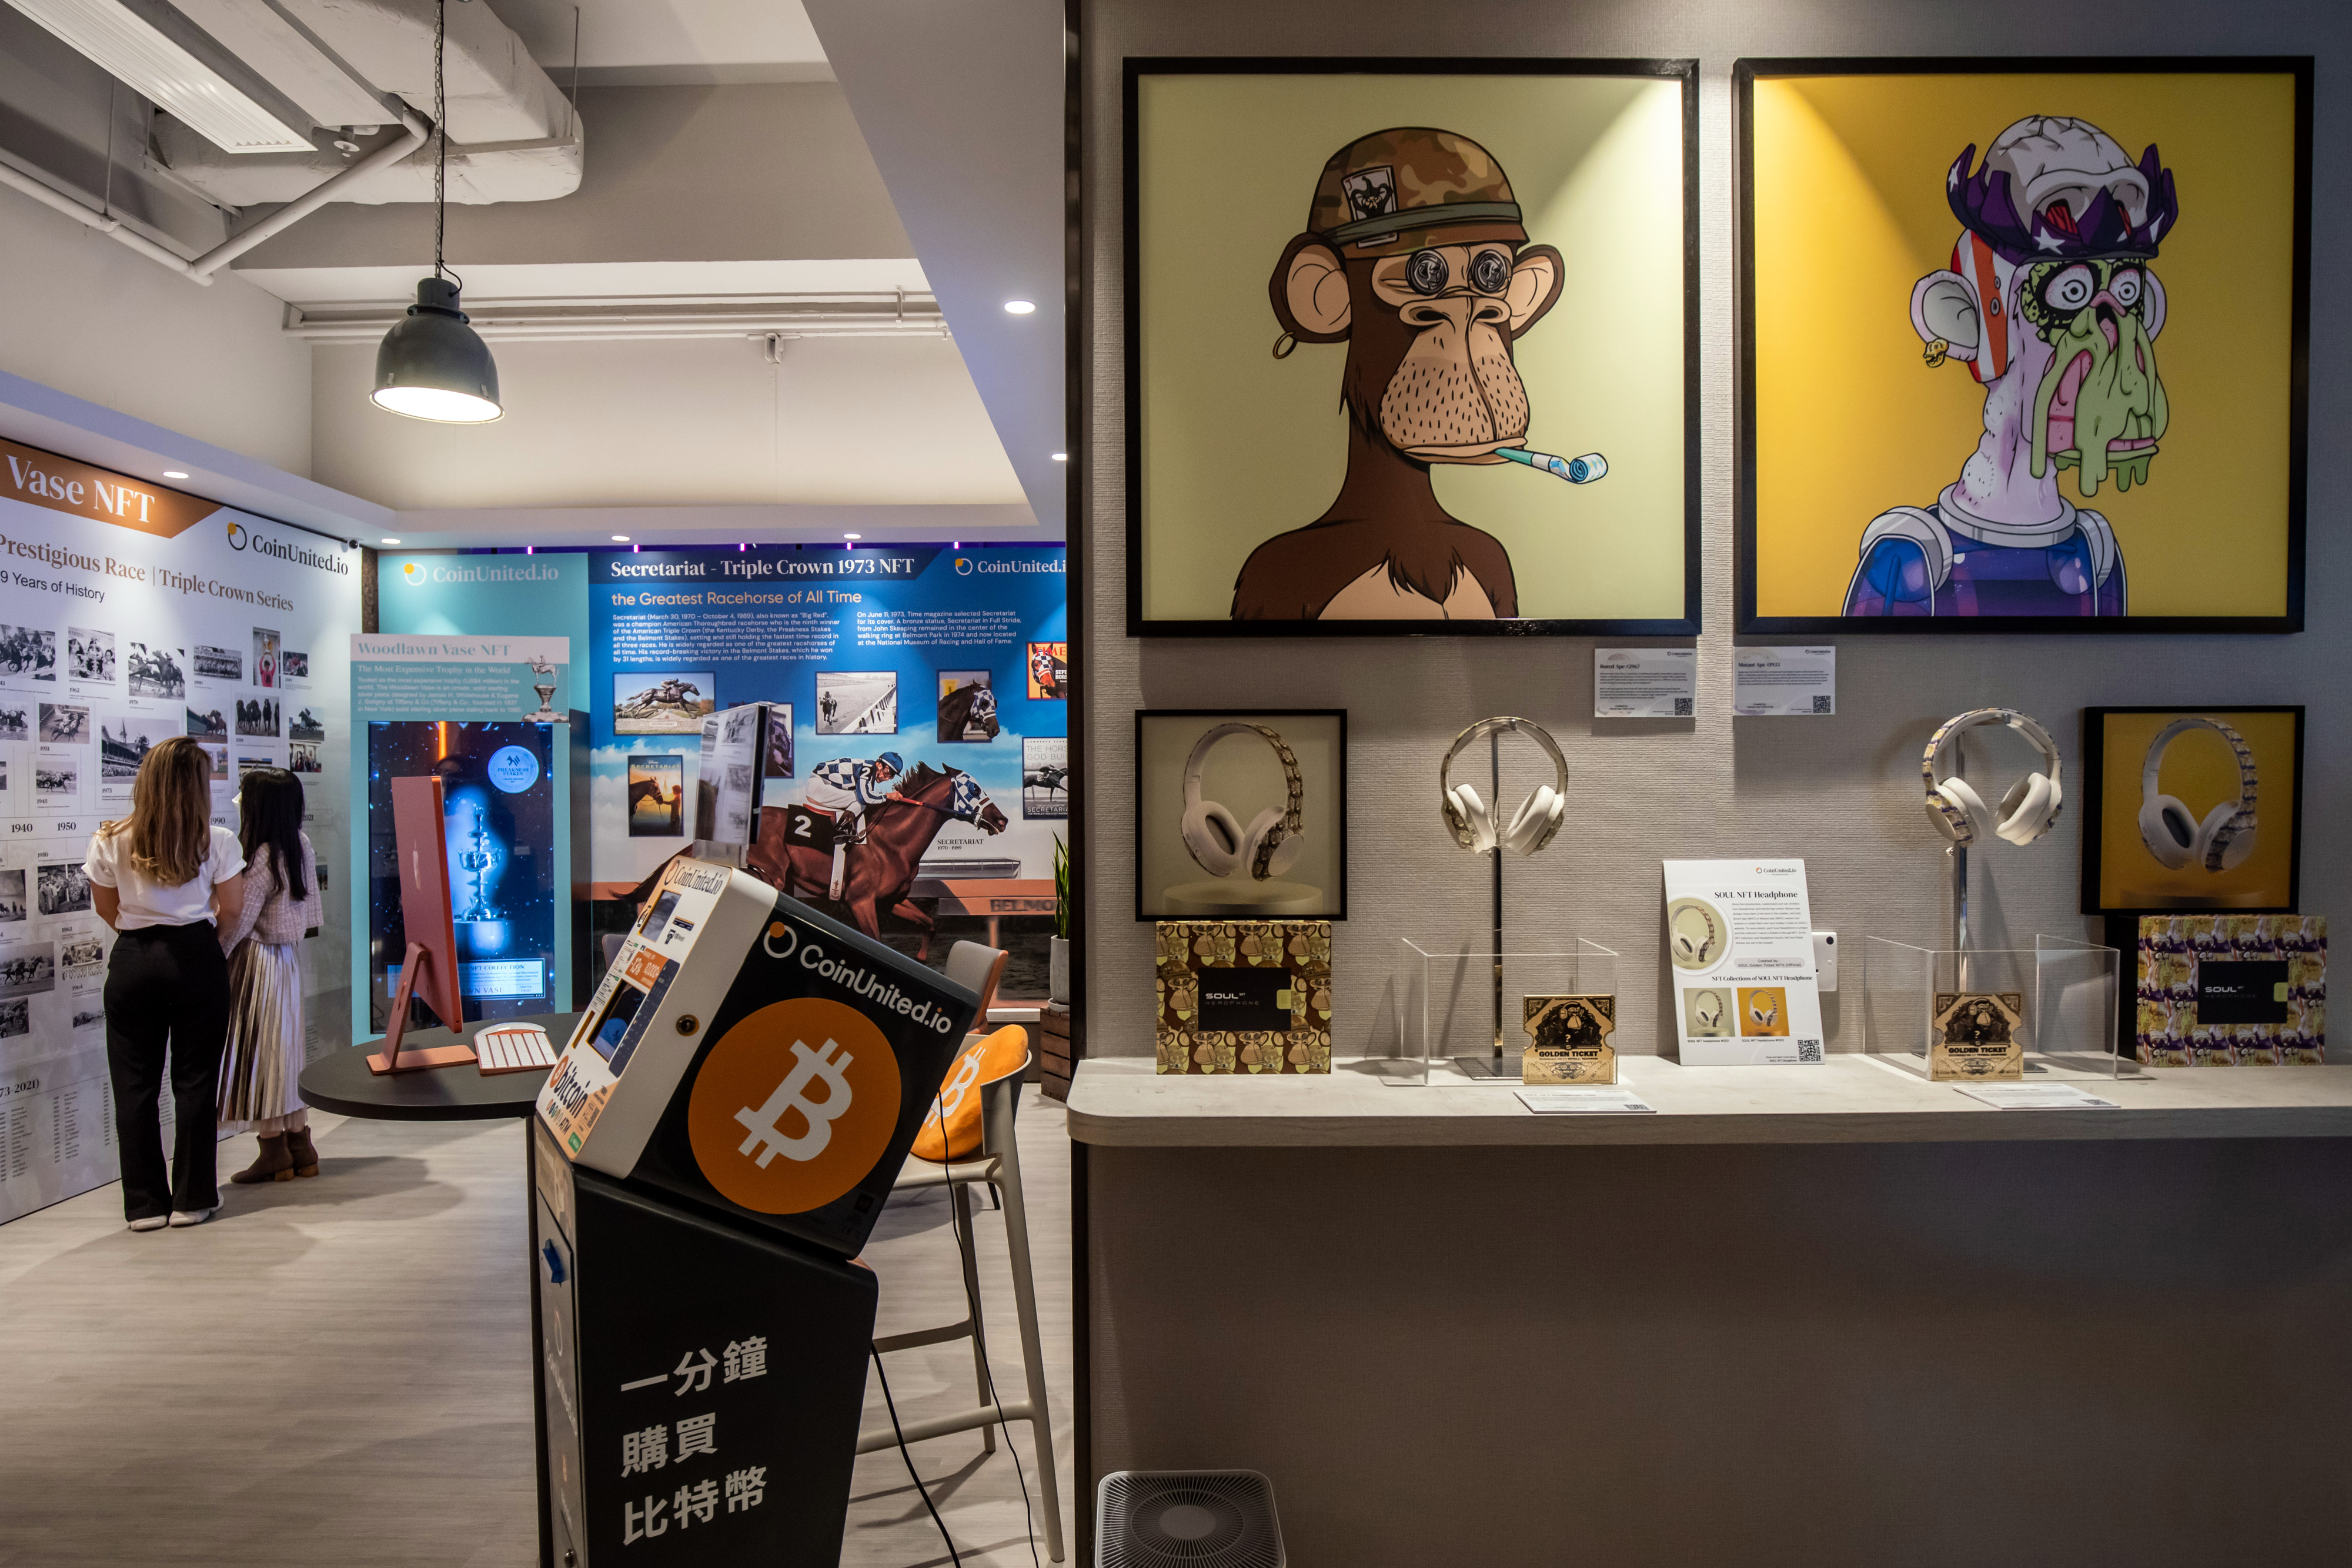 Image of the physical artwork of "Bored Ape # 2967" created by Bored Ape Yacht Club, left, and "Mutant Ape # 1933" created by Mutant Ape Yacht Club, both available for sale as an NFT, displayed at a CoinUnited cryptocurrency exchange in Hong Kong, China, on Friday, March 4, 2022.